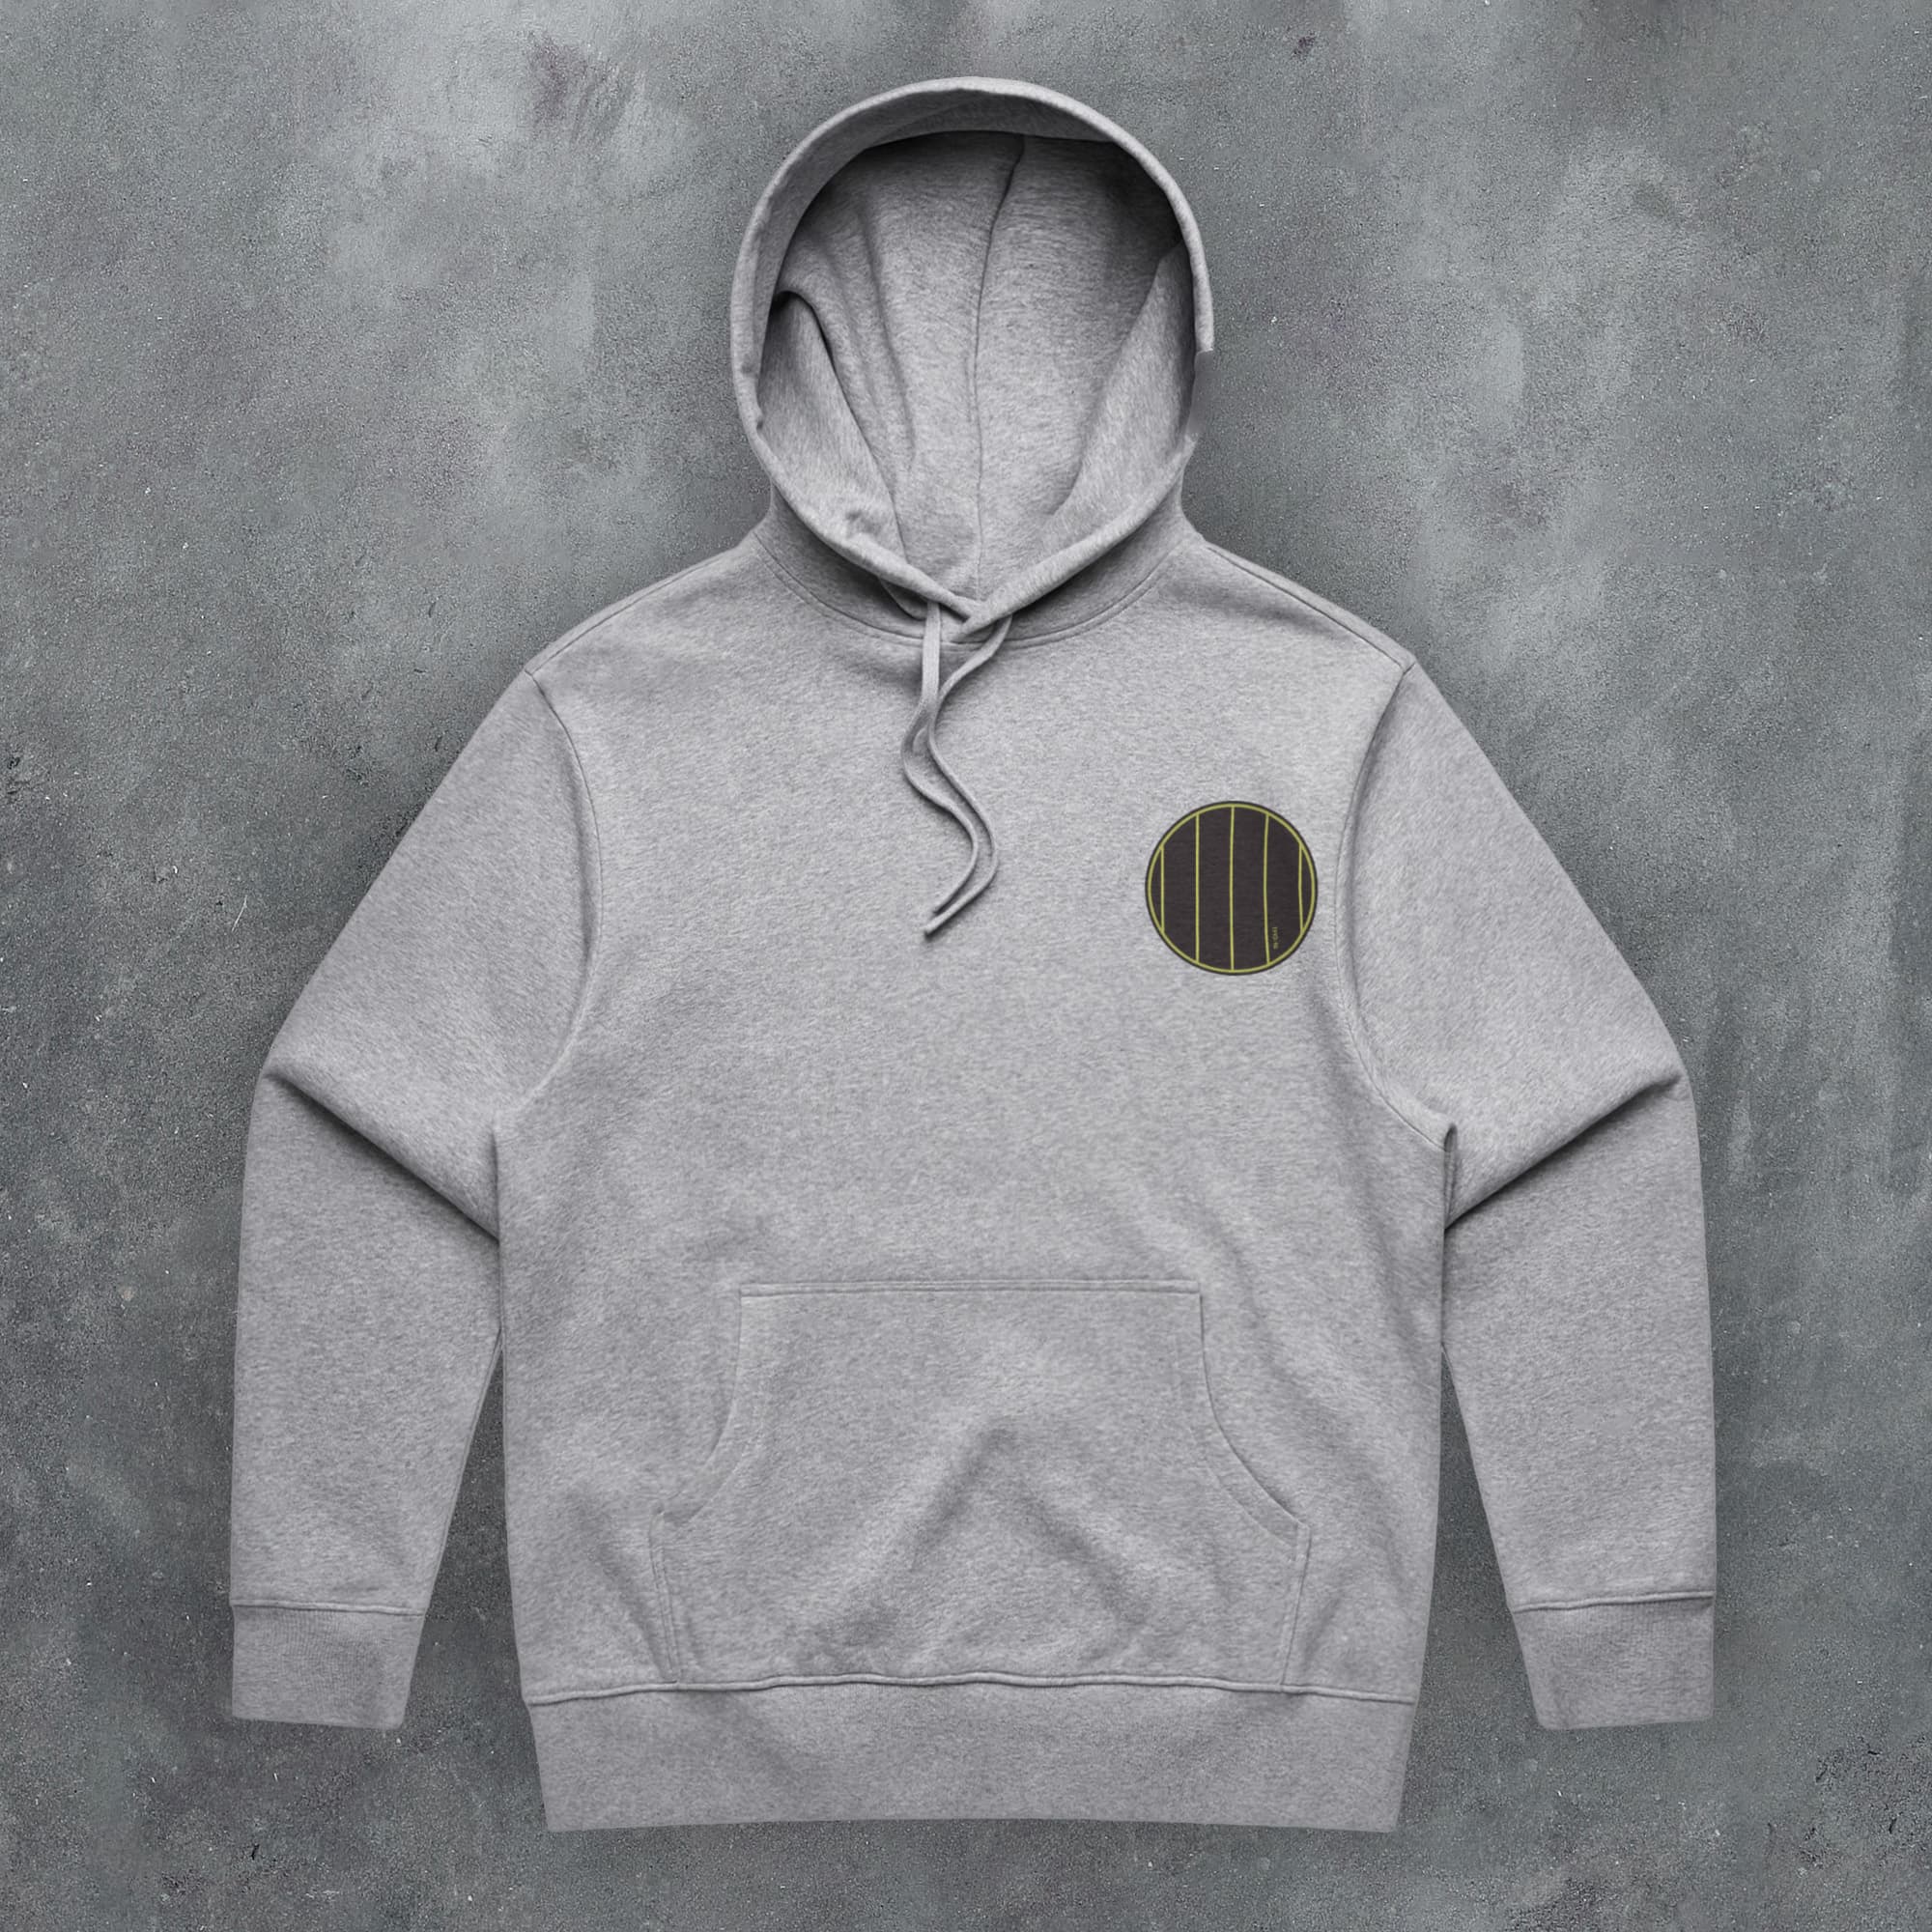 a grey hoodie with a brown stripe on the side